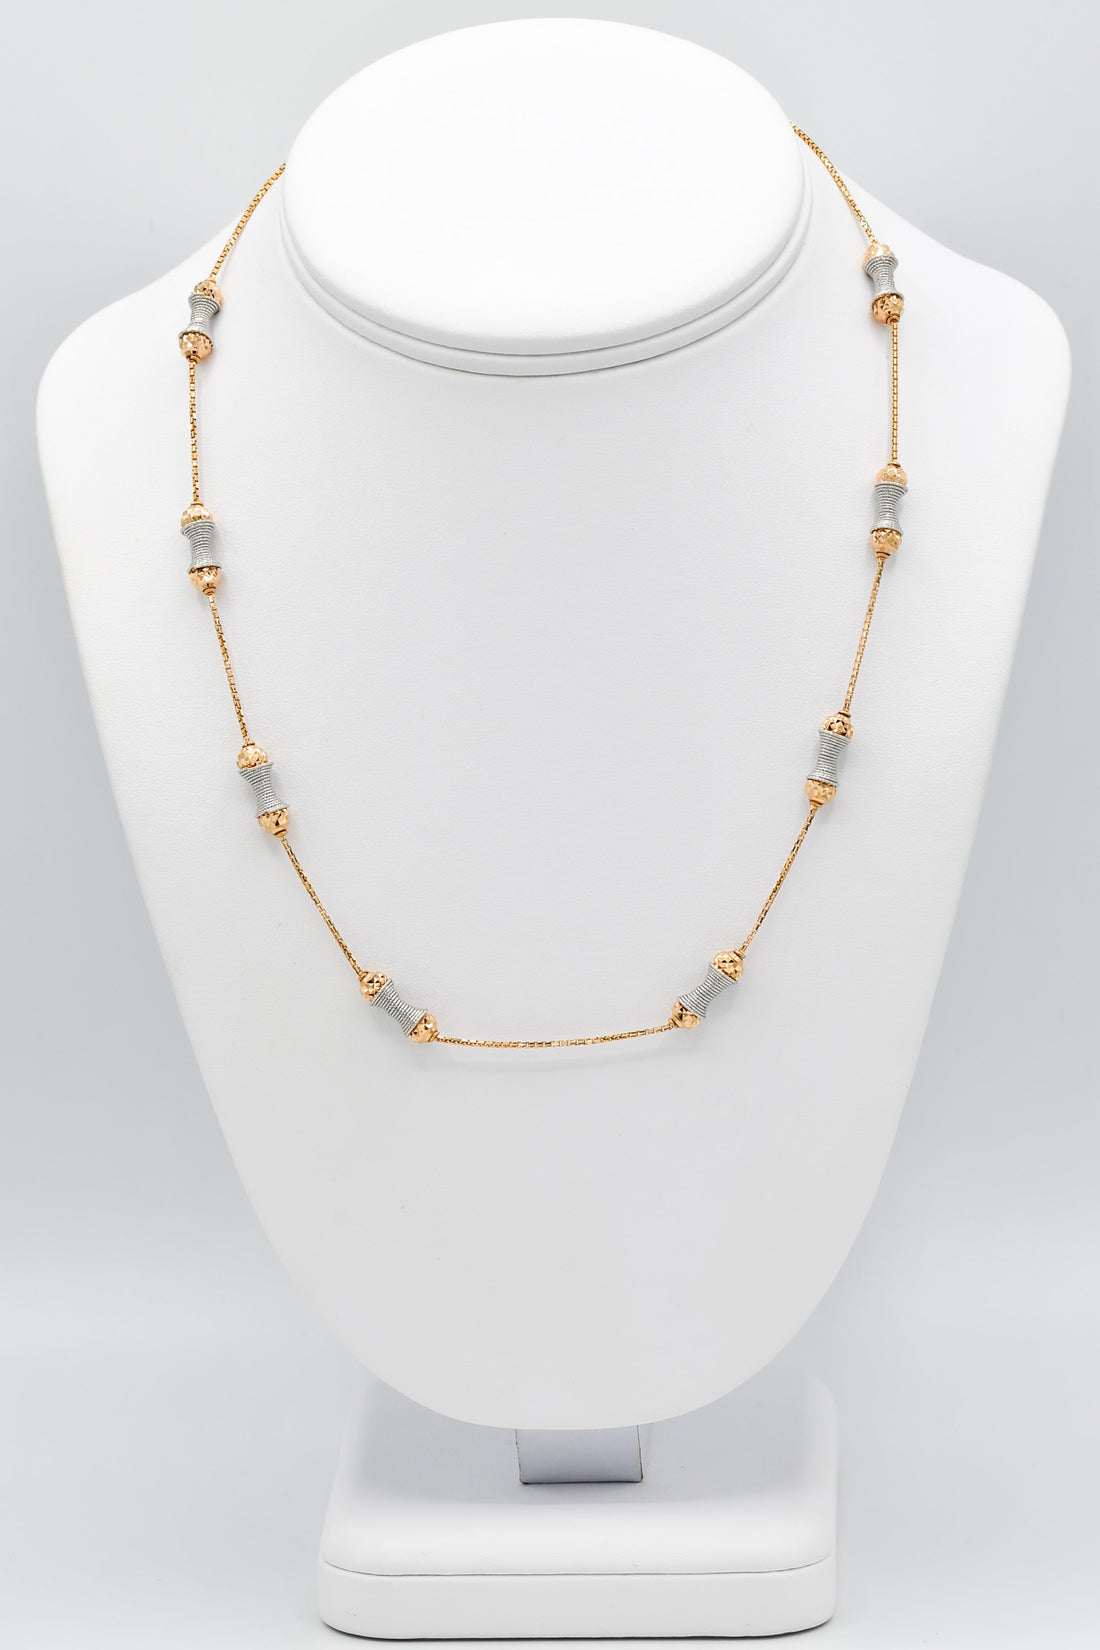 18ct Rose Gold Two Tone Fancy Chain - Roop Darshan